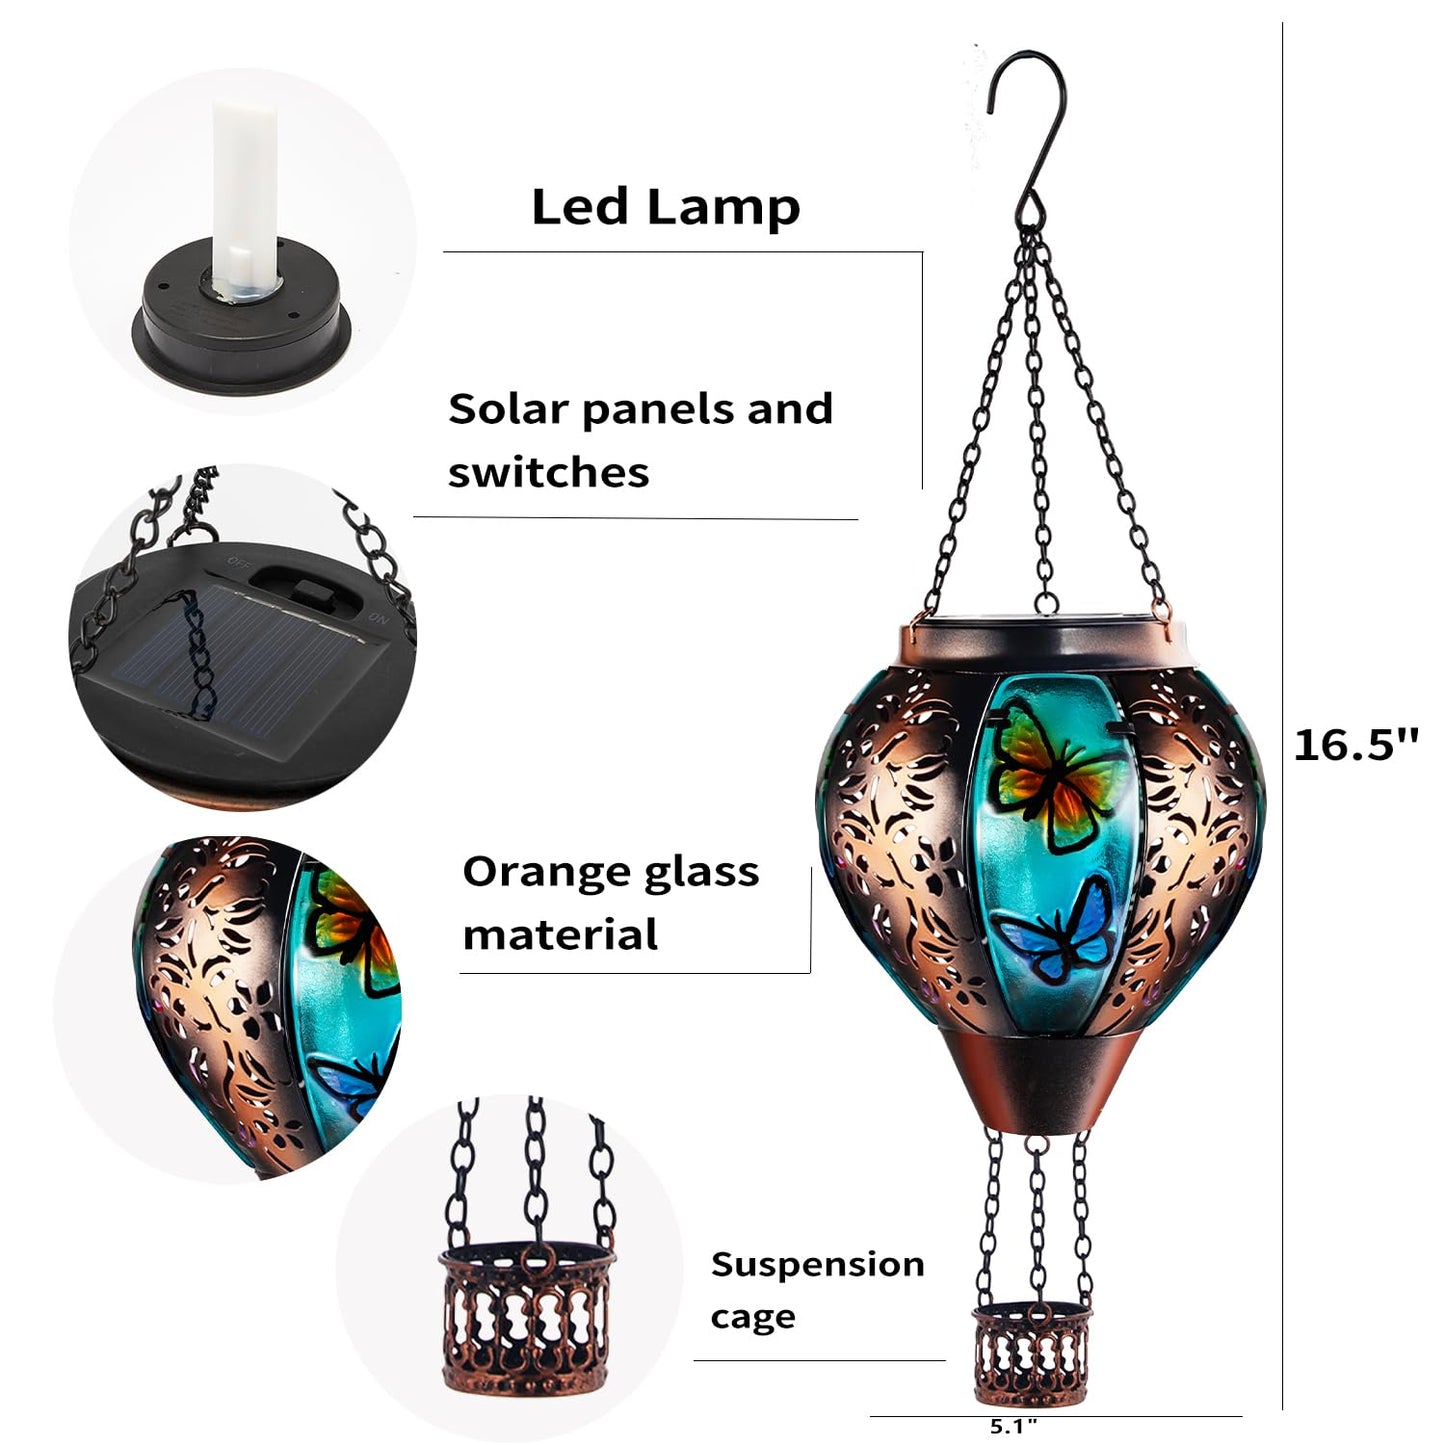 Hot Air Balloon Solar Lantern Butterfly Lights with Flickering Flame Solar Powered LED Lights Outdoor Waterproof Decorative Hanging Lights for Garden Patio Pathway Yard Porch Decor